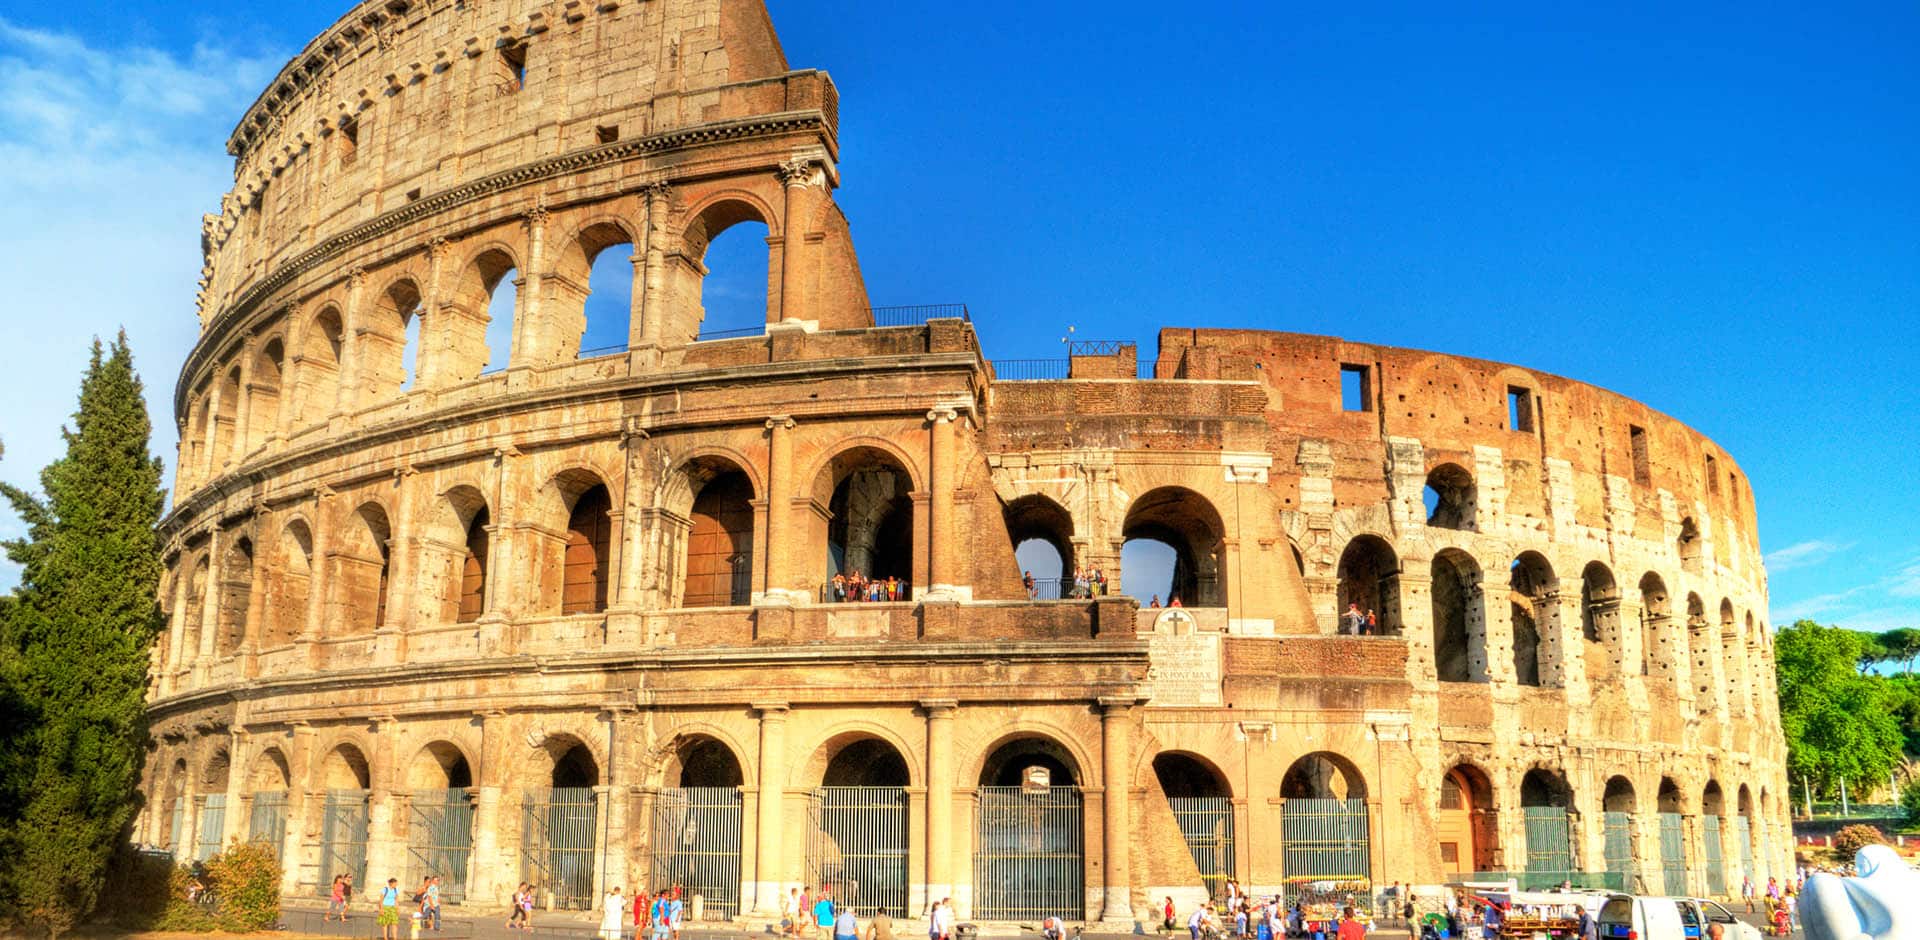 Colosseum Rome Italy best destination in the world